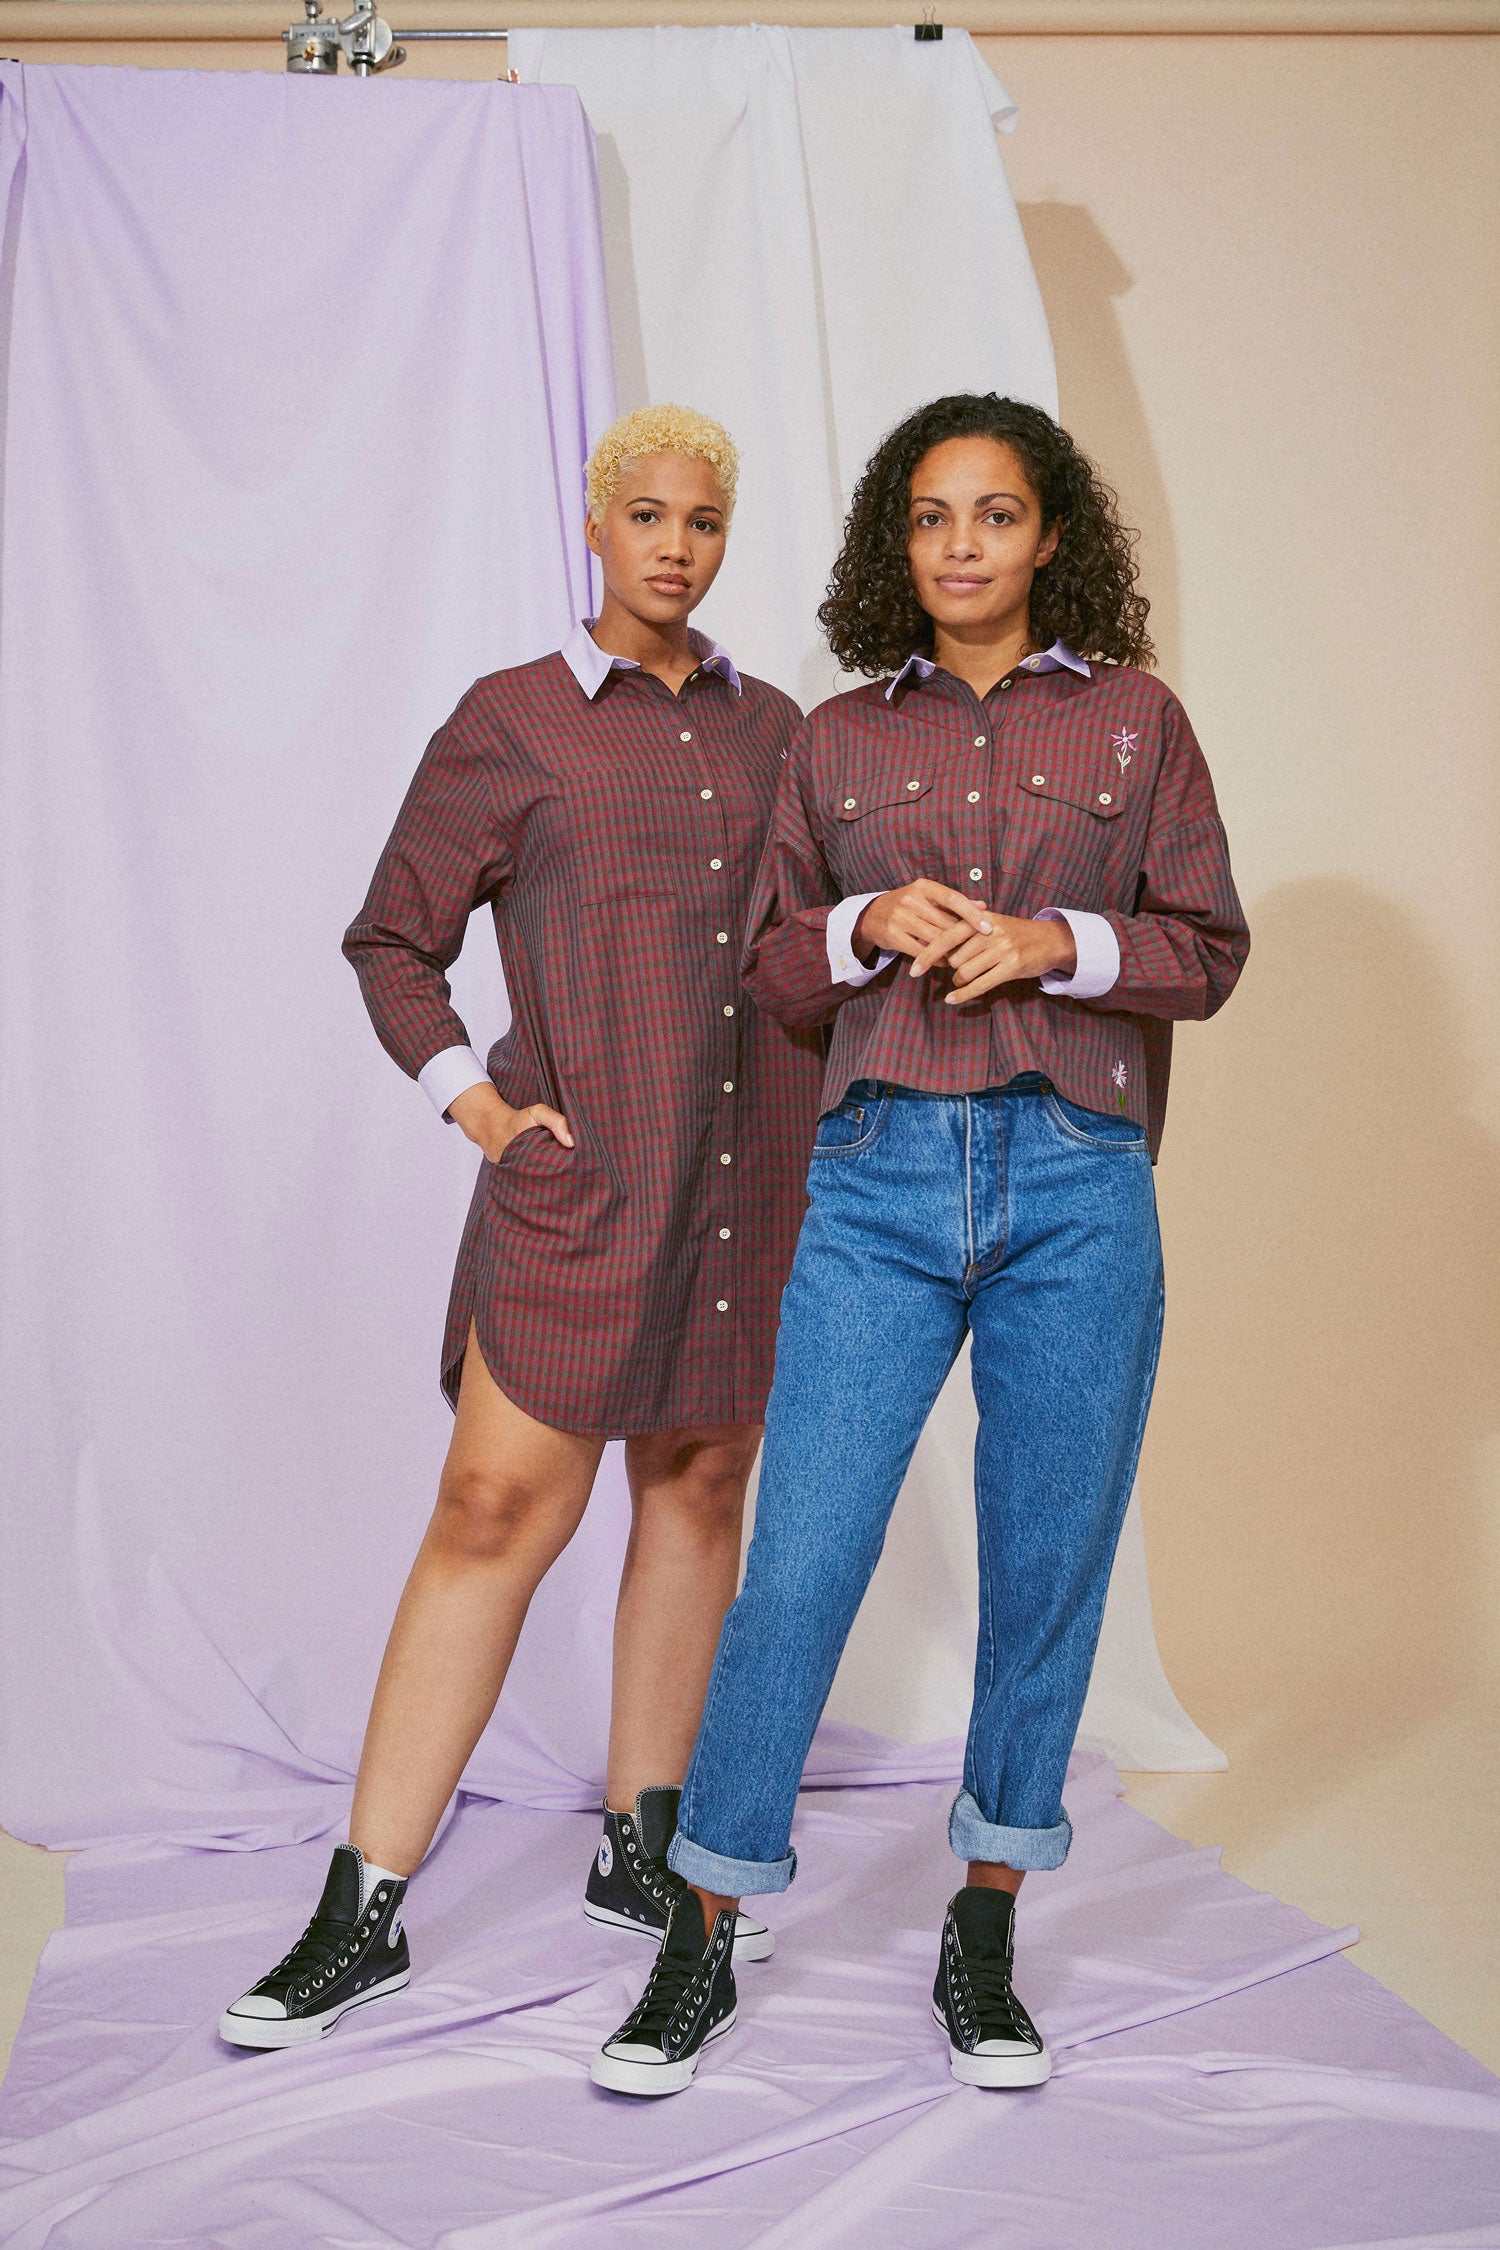 Two models stand side by side. The model on the right wears the women's Red Check Shirt, Saywood Studio, Jules Utility Shirt with flower embroidery, Red Check Cotton. The model on the left wears the red check Etta Shirtdress by Saywood